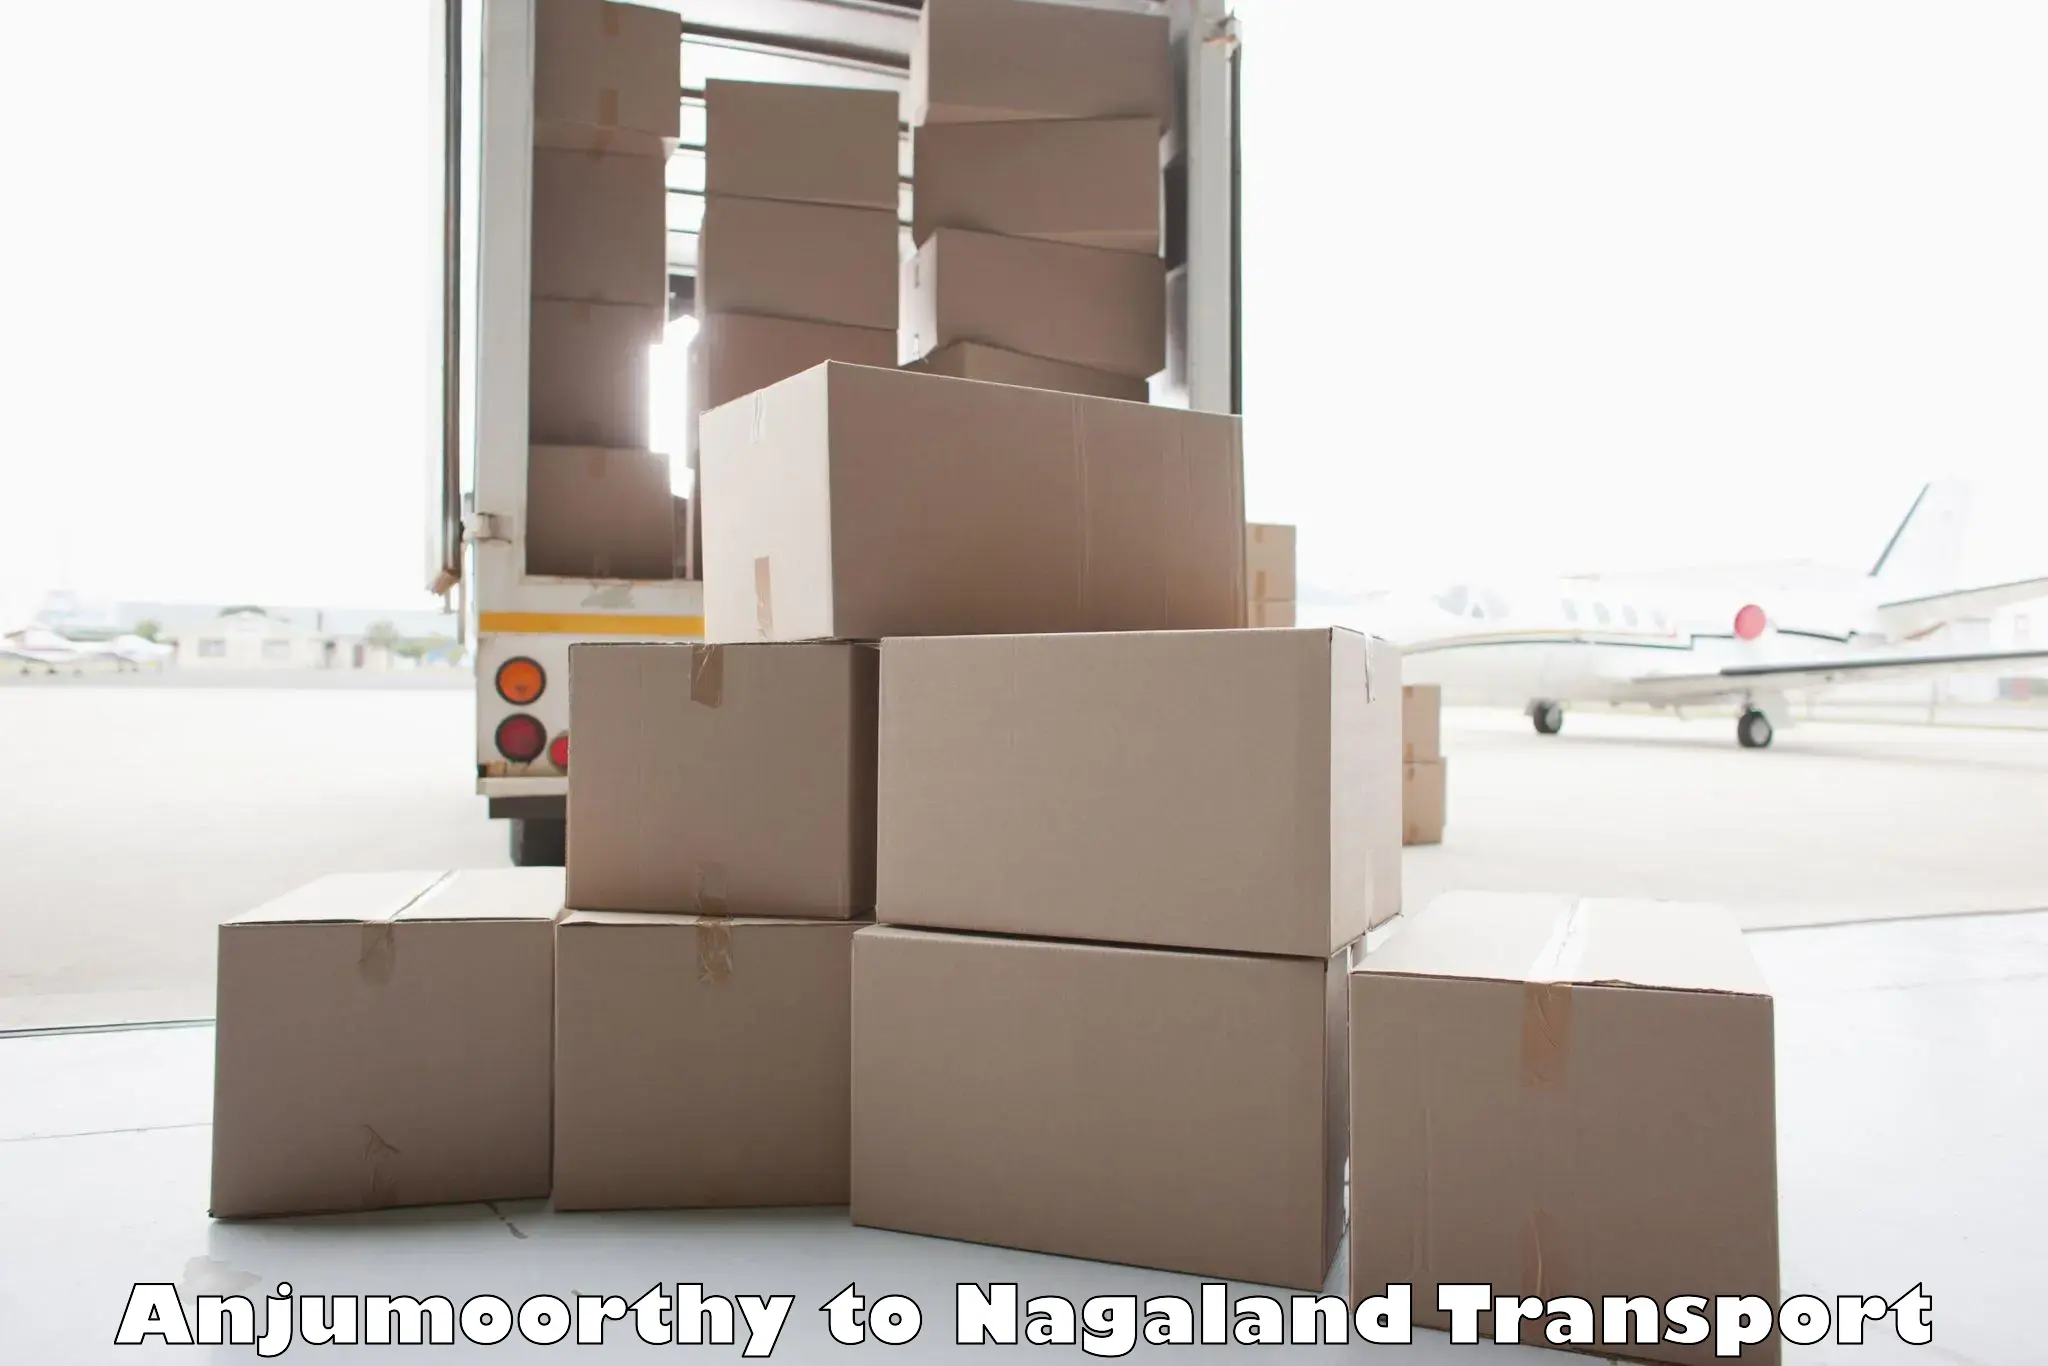 Container transportation services Anjumoorthy to Mokokchung